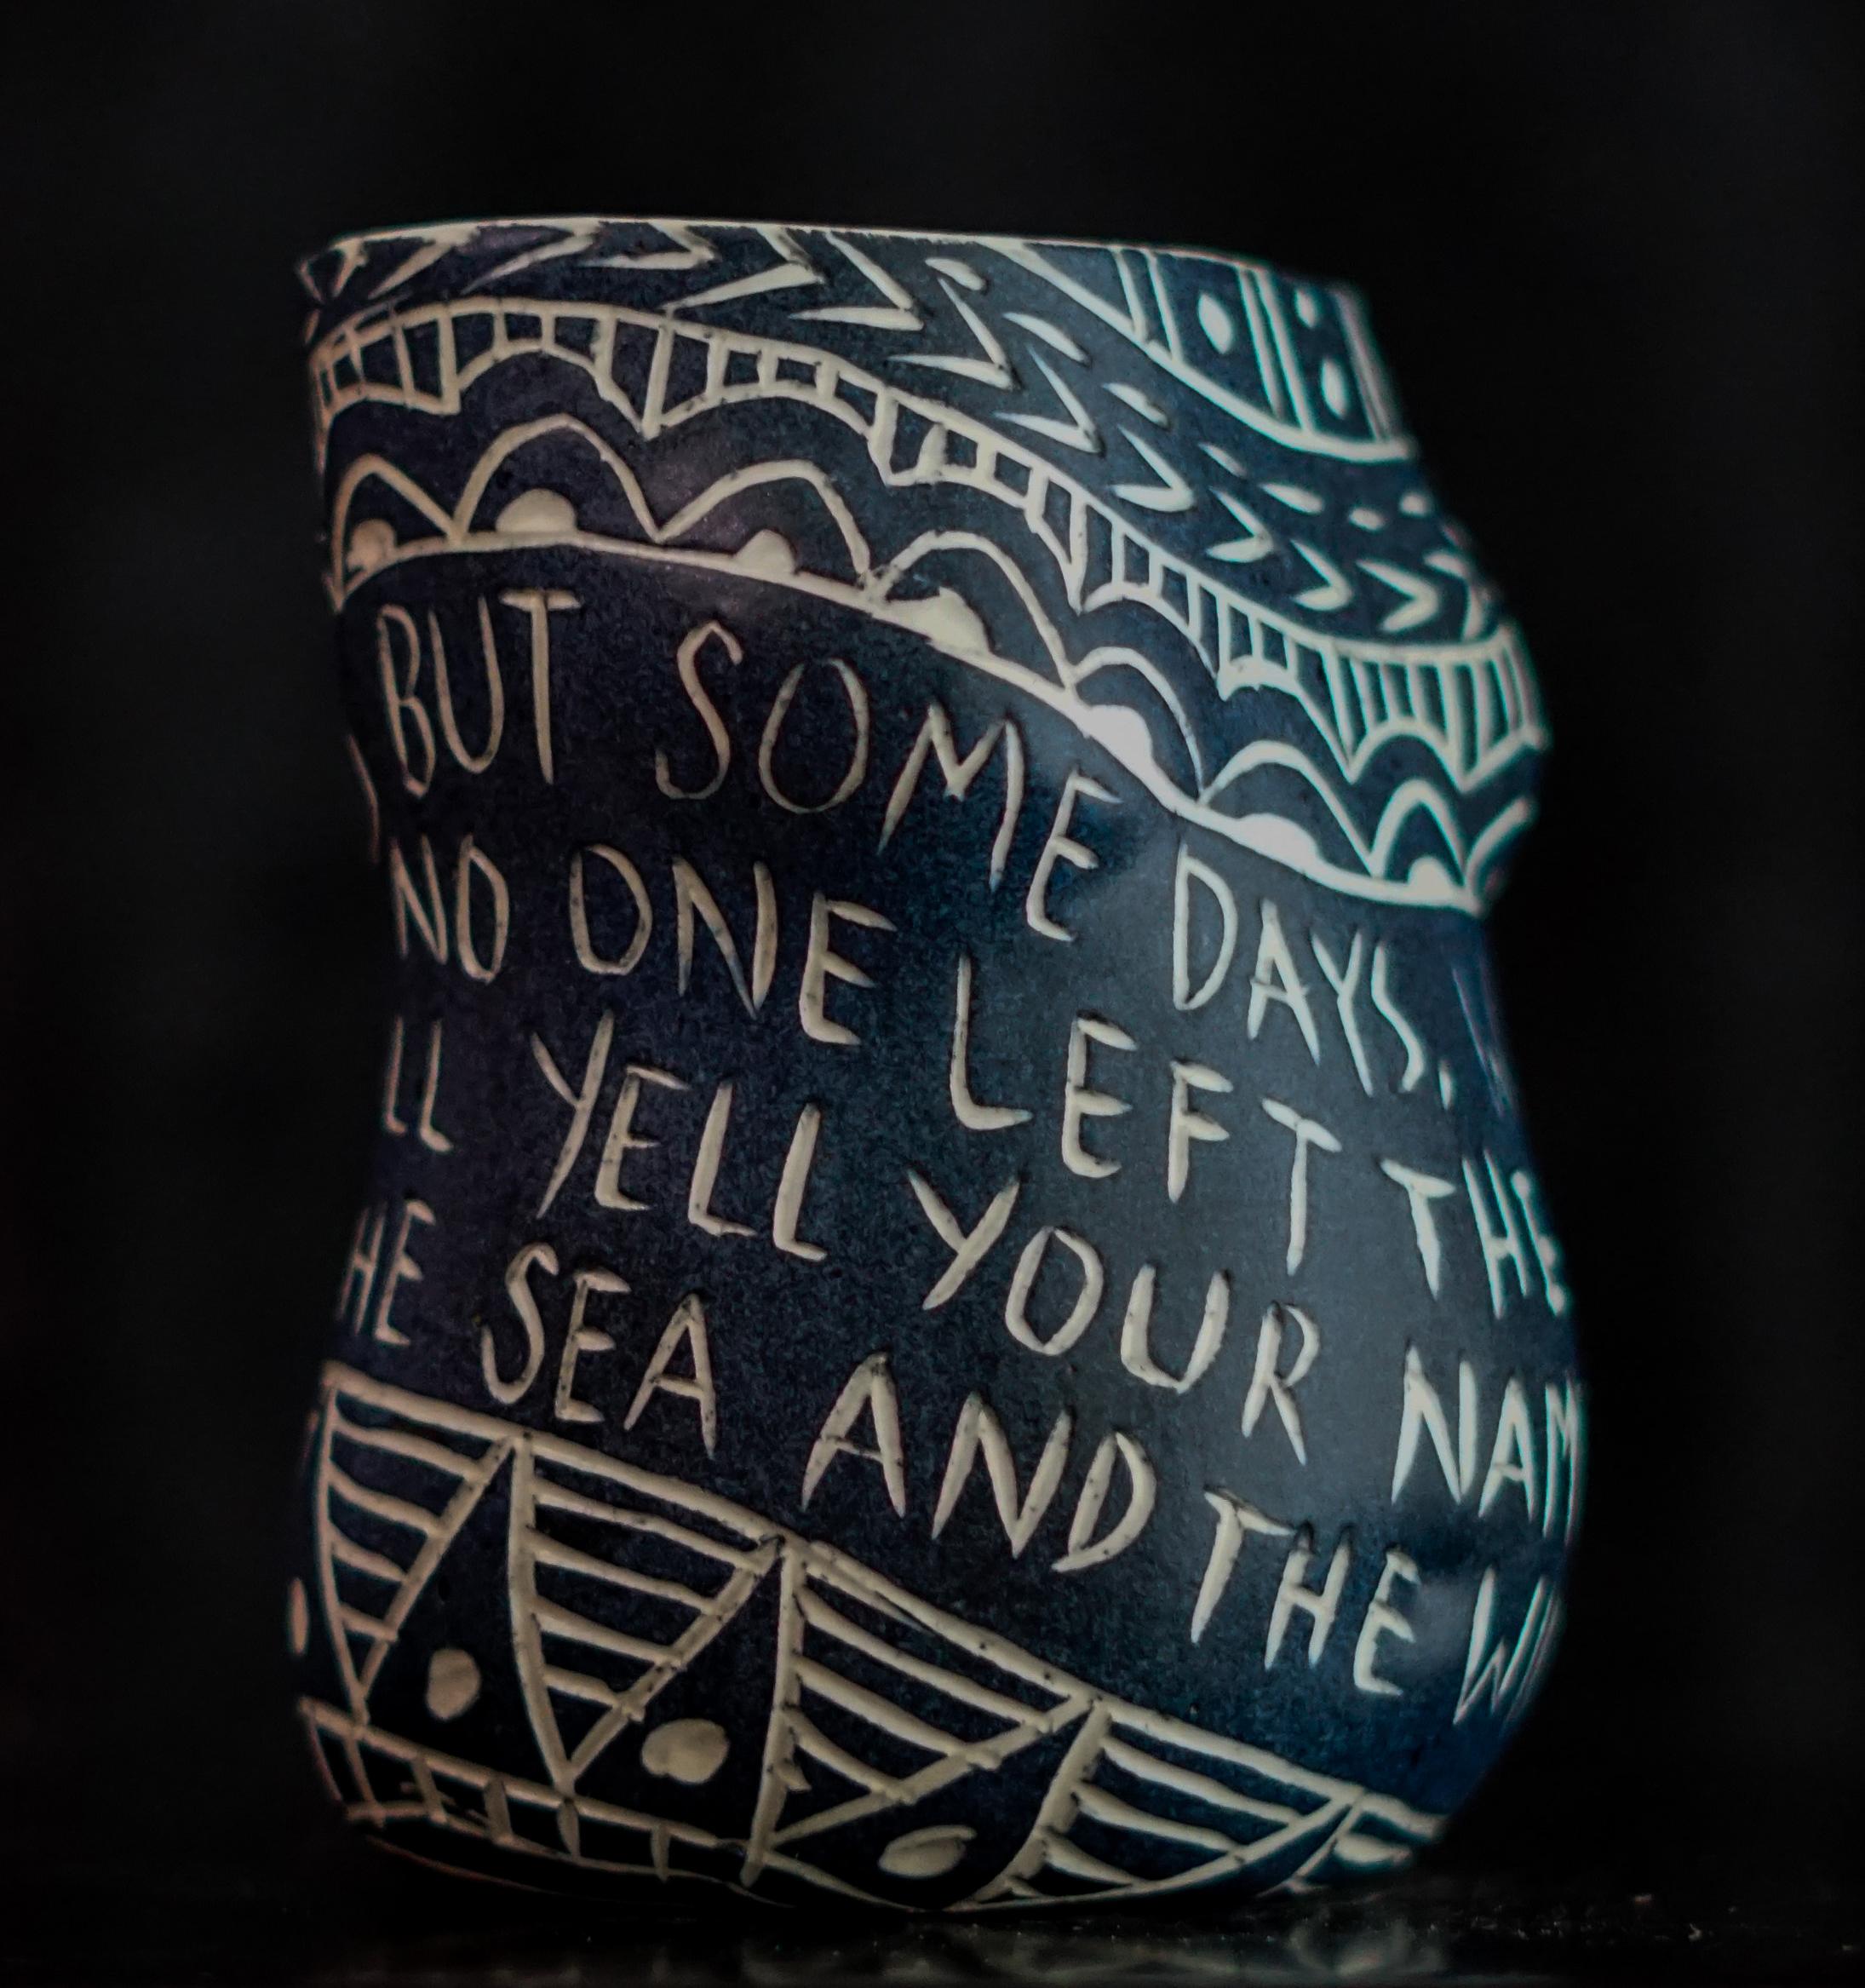 I Whisper Just to You, and Some Days We are Both at Sea Diptych Porcelain cup  For Sale 4